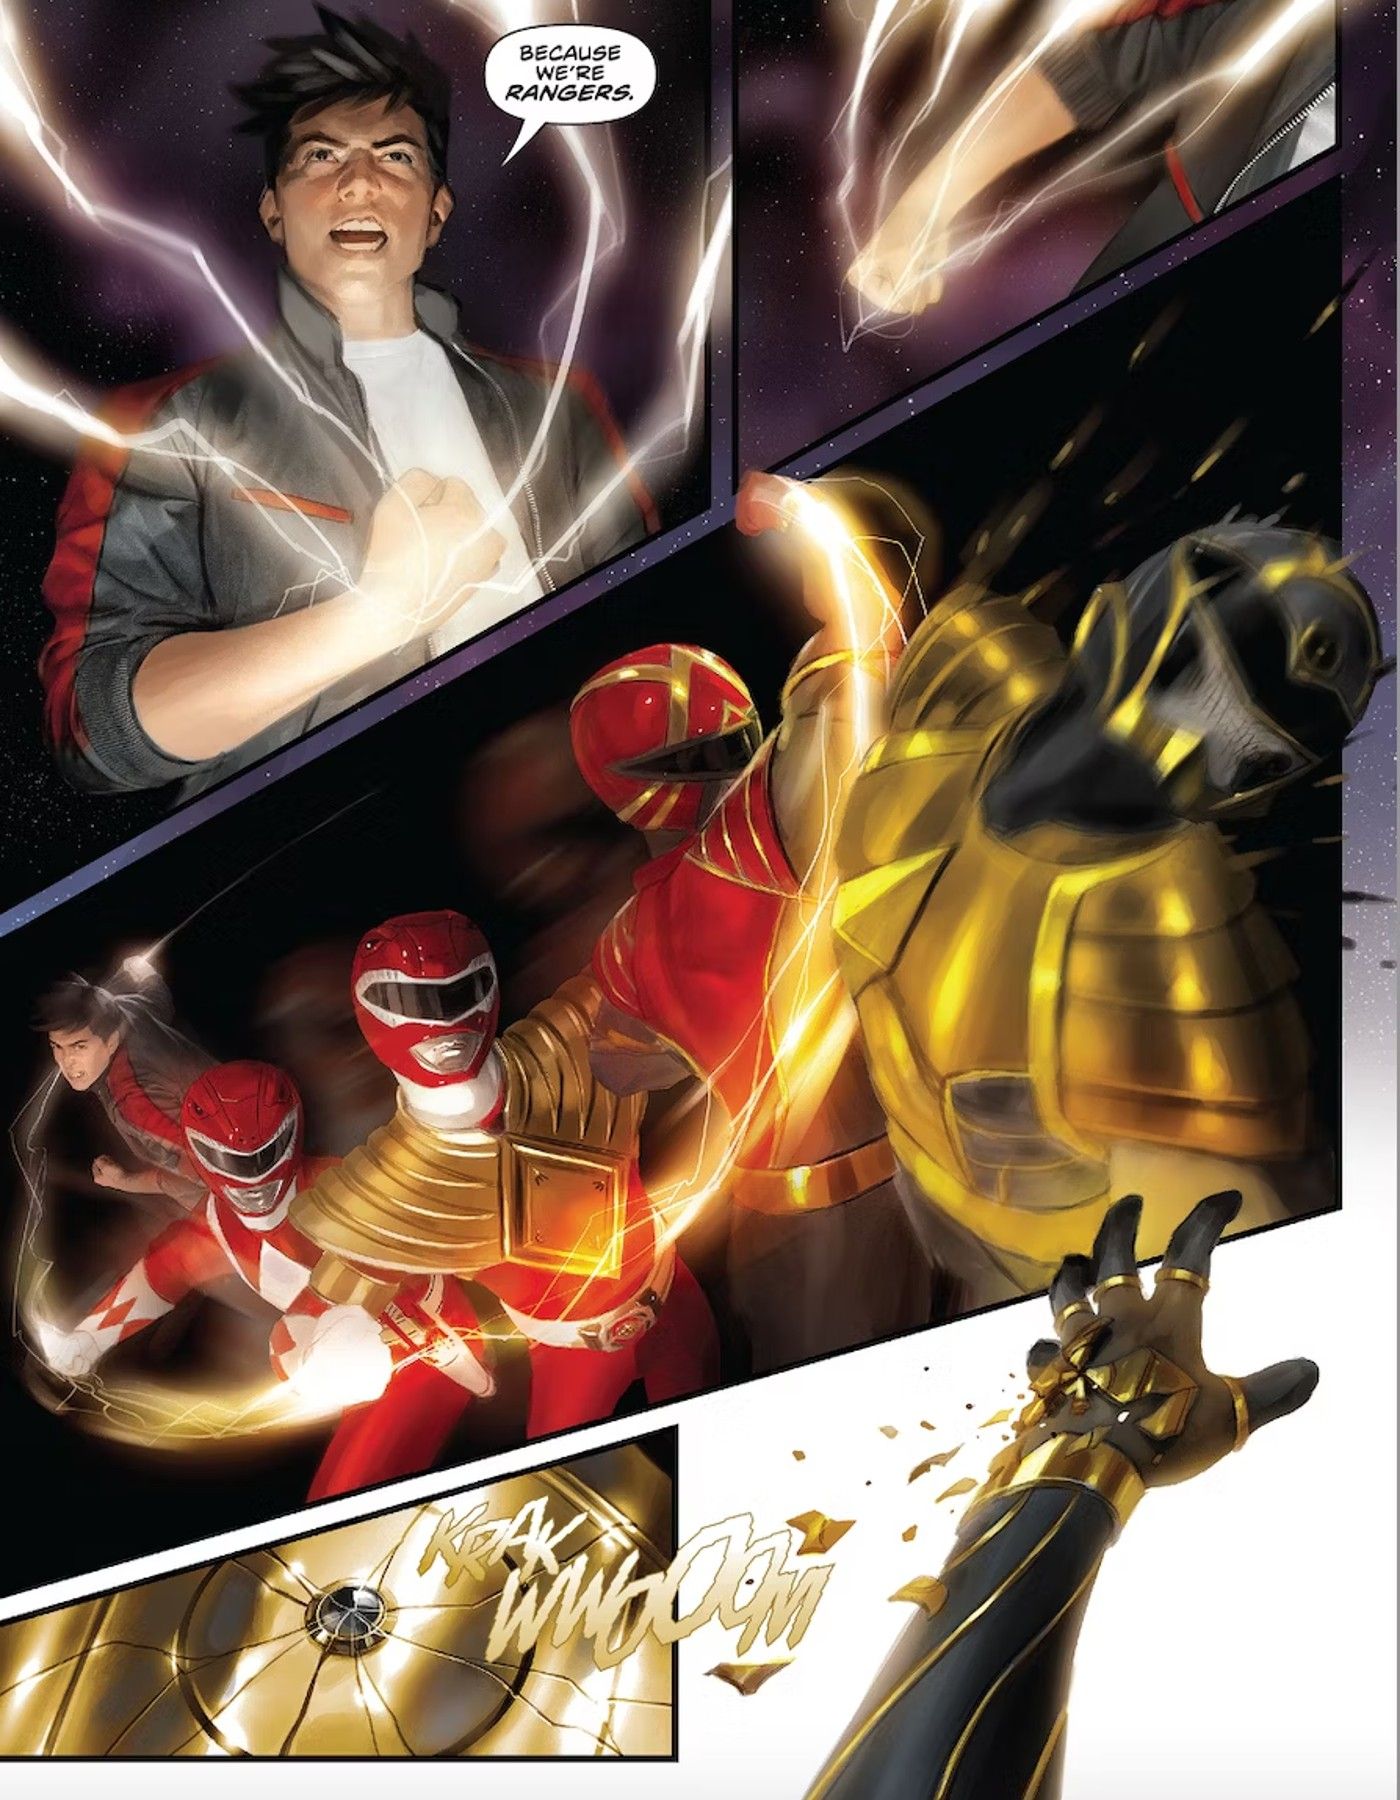 Jason the Red Omega Mighty Morphin Power Rangers defeats The Death Ranger